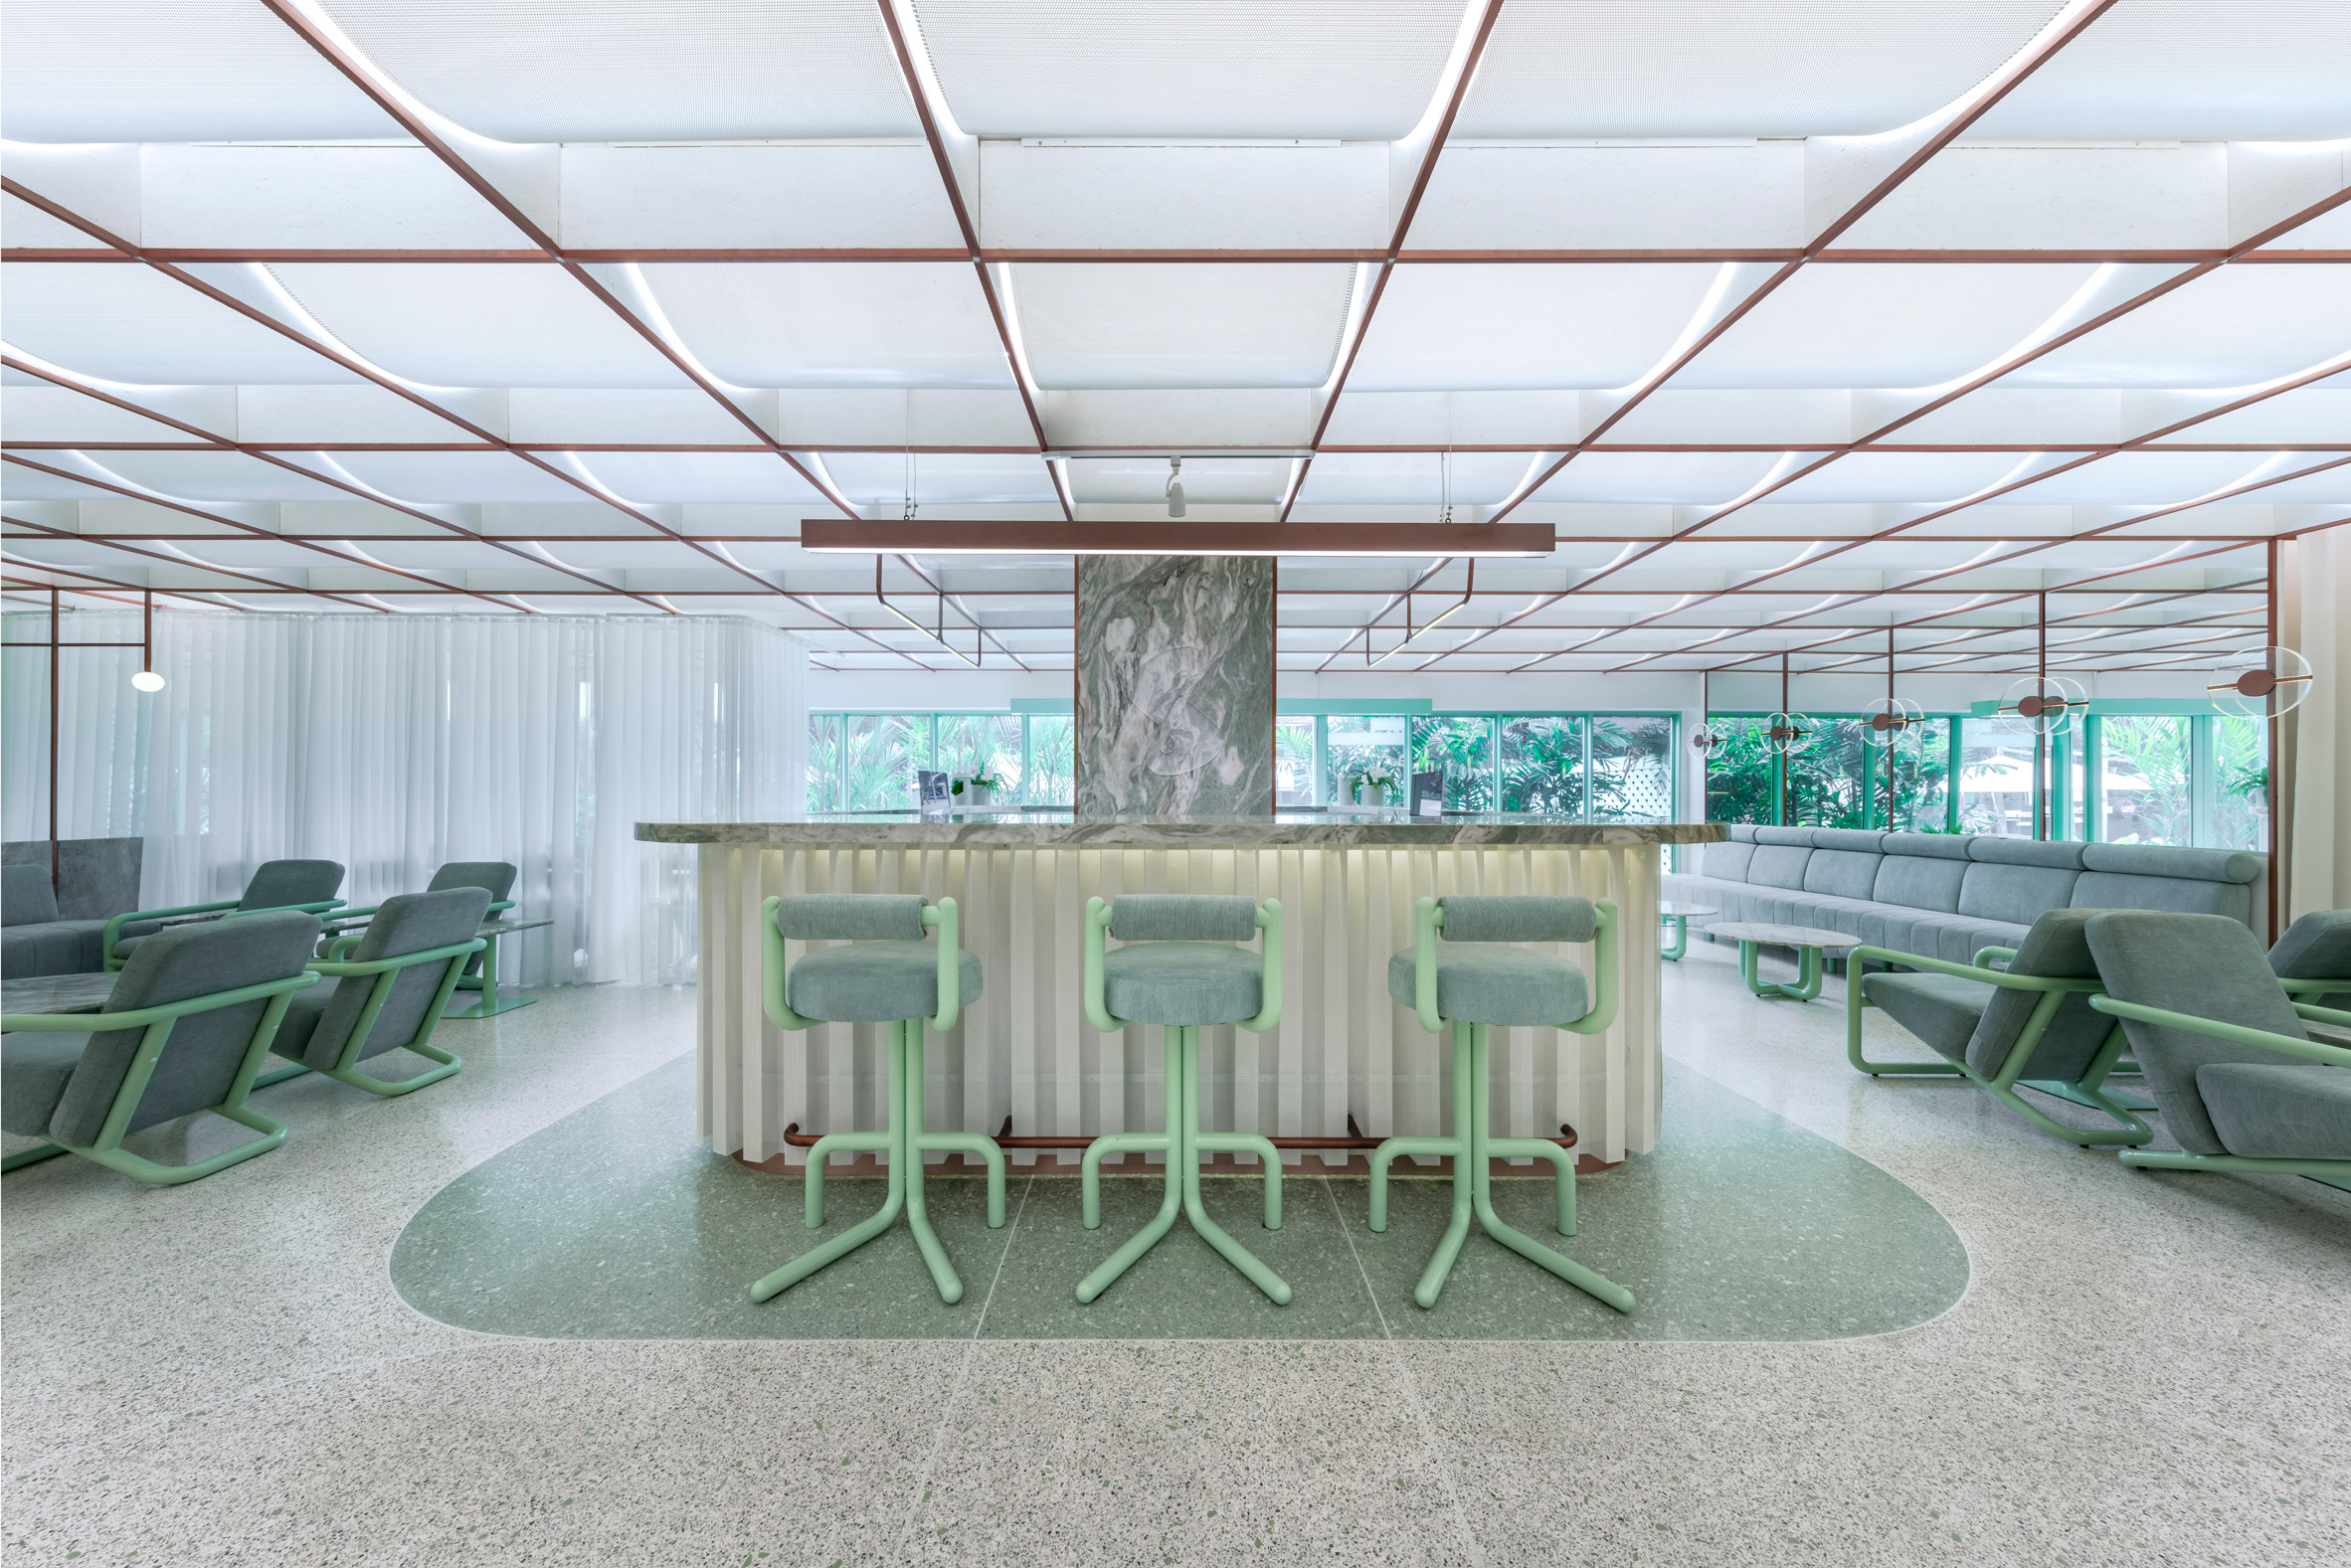 Infinity Wellbeing spa in Bangkok has calming white and green interiors